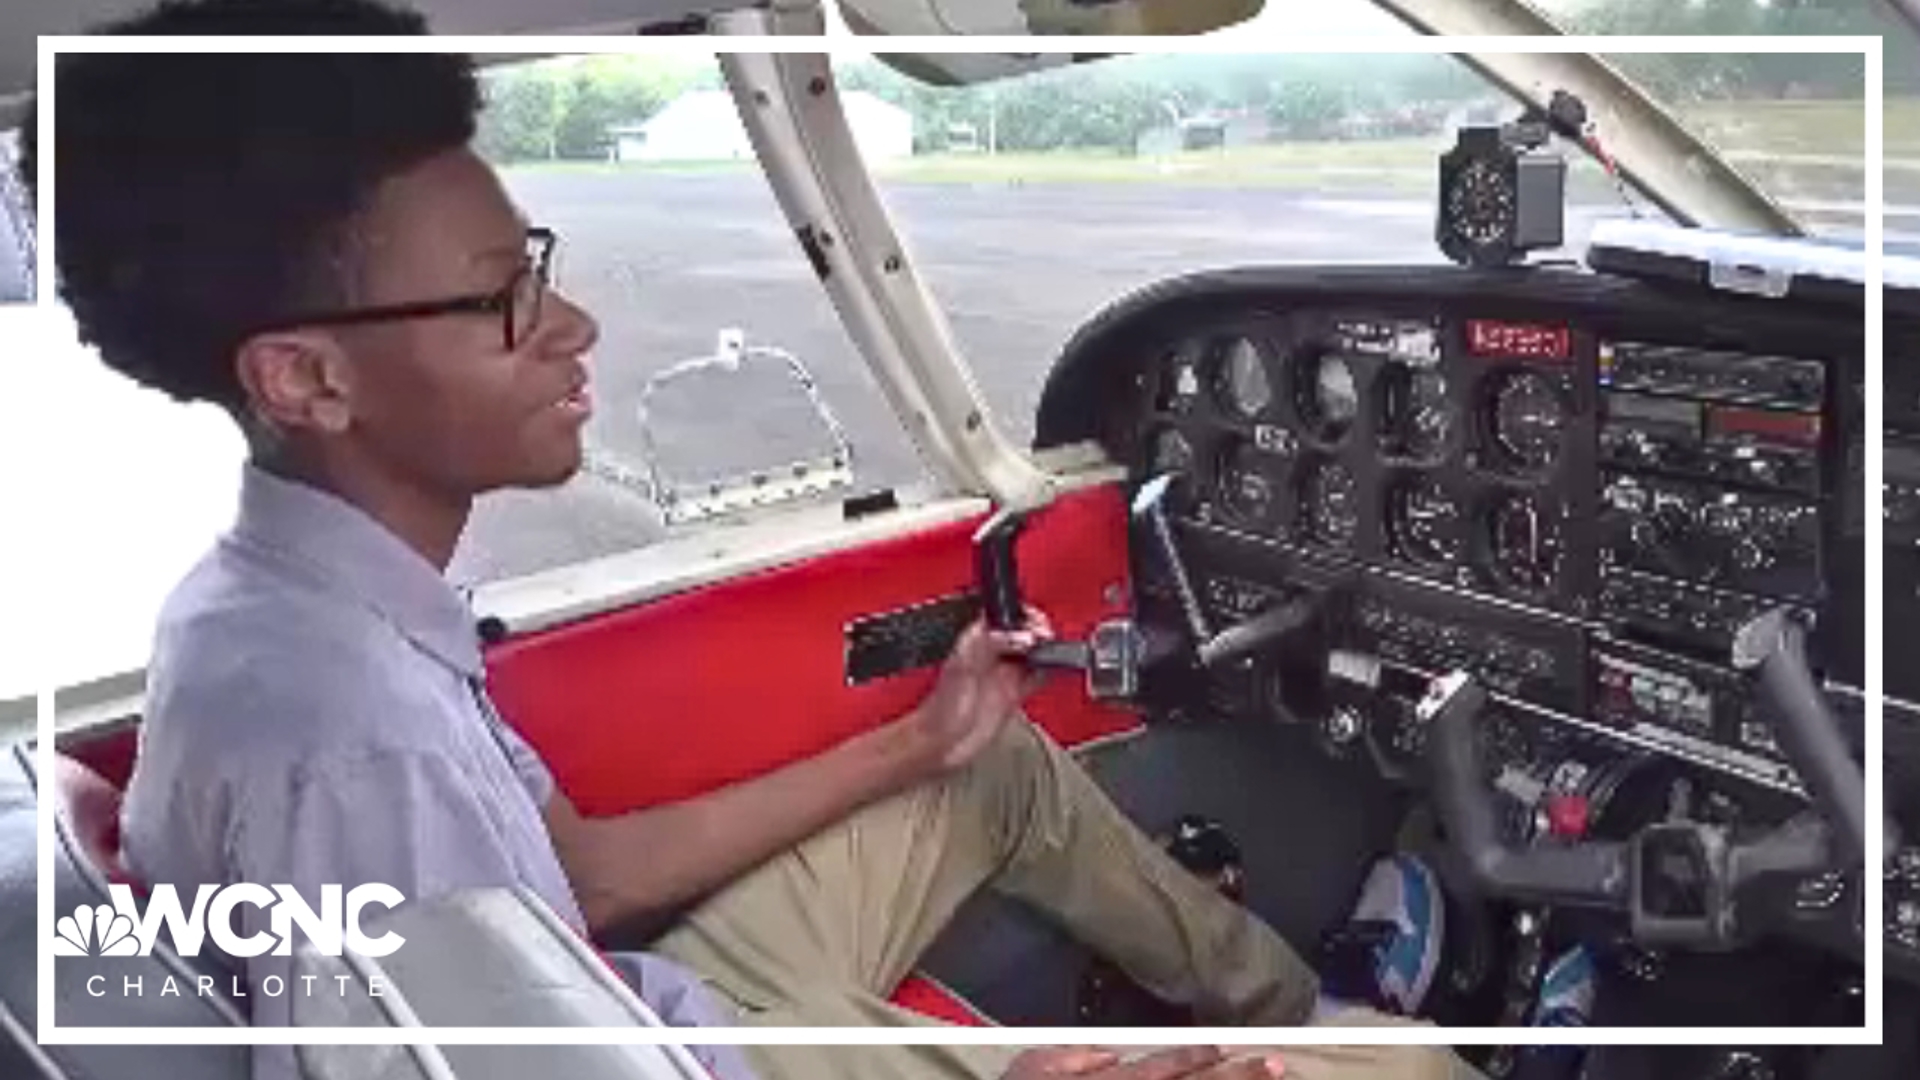 Ryan Garner is the youngest, and first African American, to receive a Private Pilot License at Goose Creek Airport.